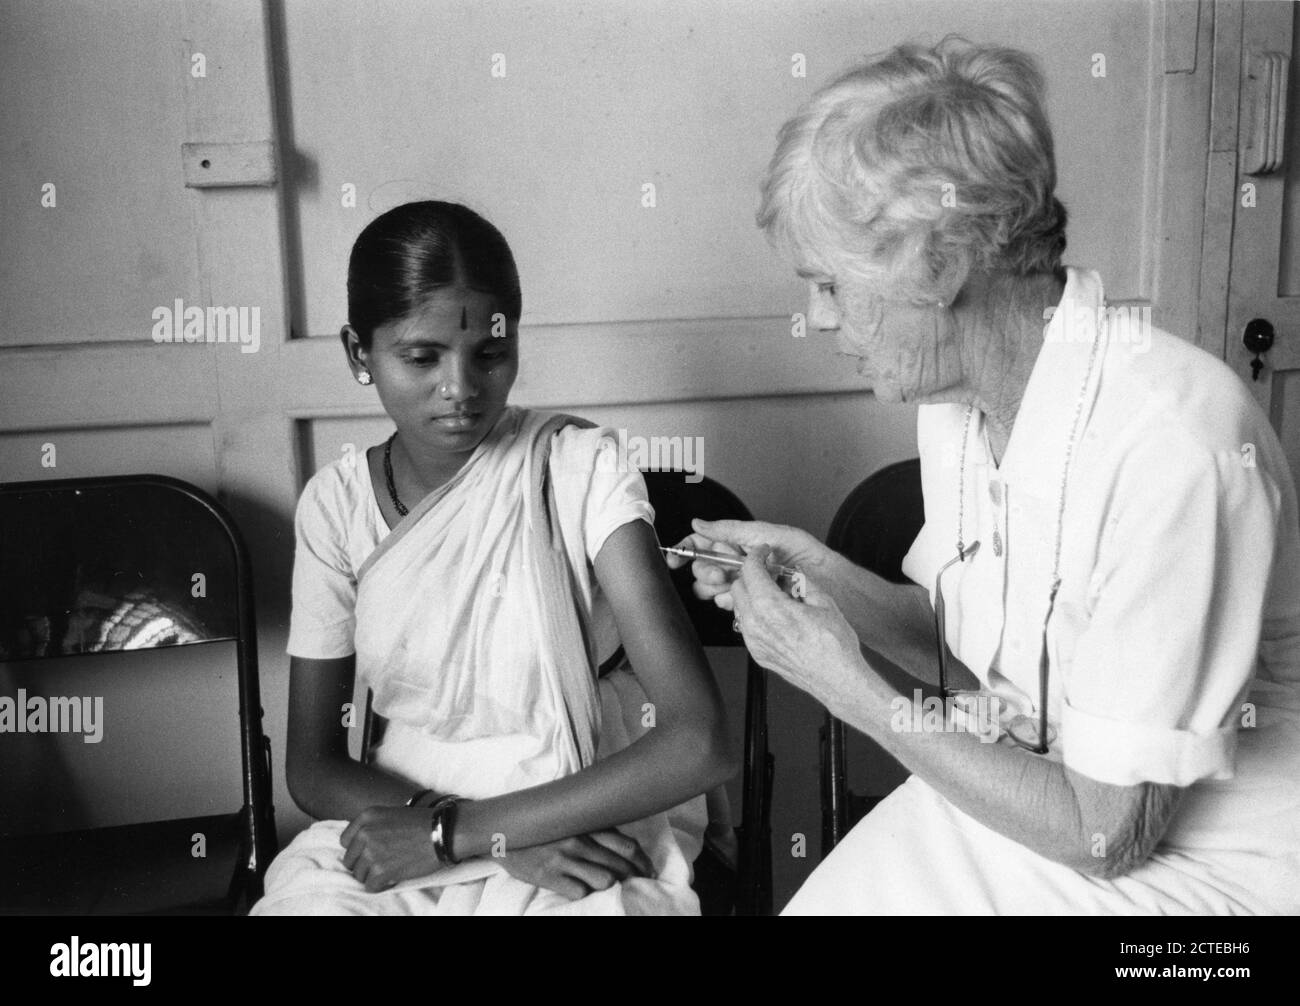 Peace Corps volunteer Lillian Gordy Carter (1898-1983), mother of President Jimmy Carter, serving in India, Godrej Colony, India, June 1968. (Photo by Vern Richey/Peace Corps/National Archives and Records Administration/RBM Vintage Images) Stock Photo